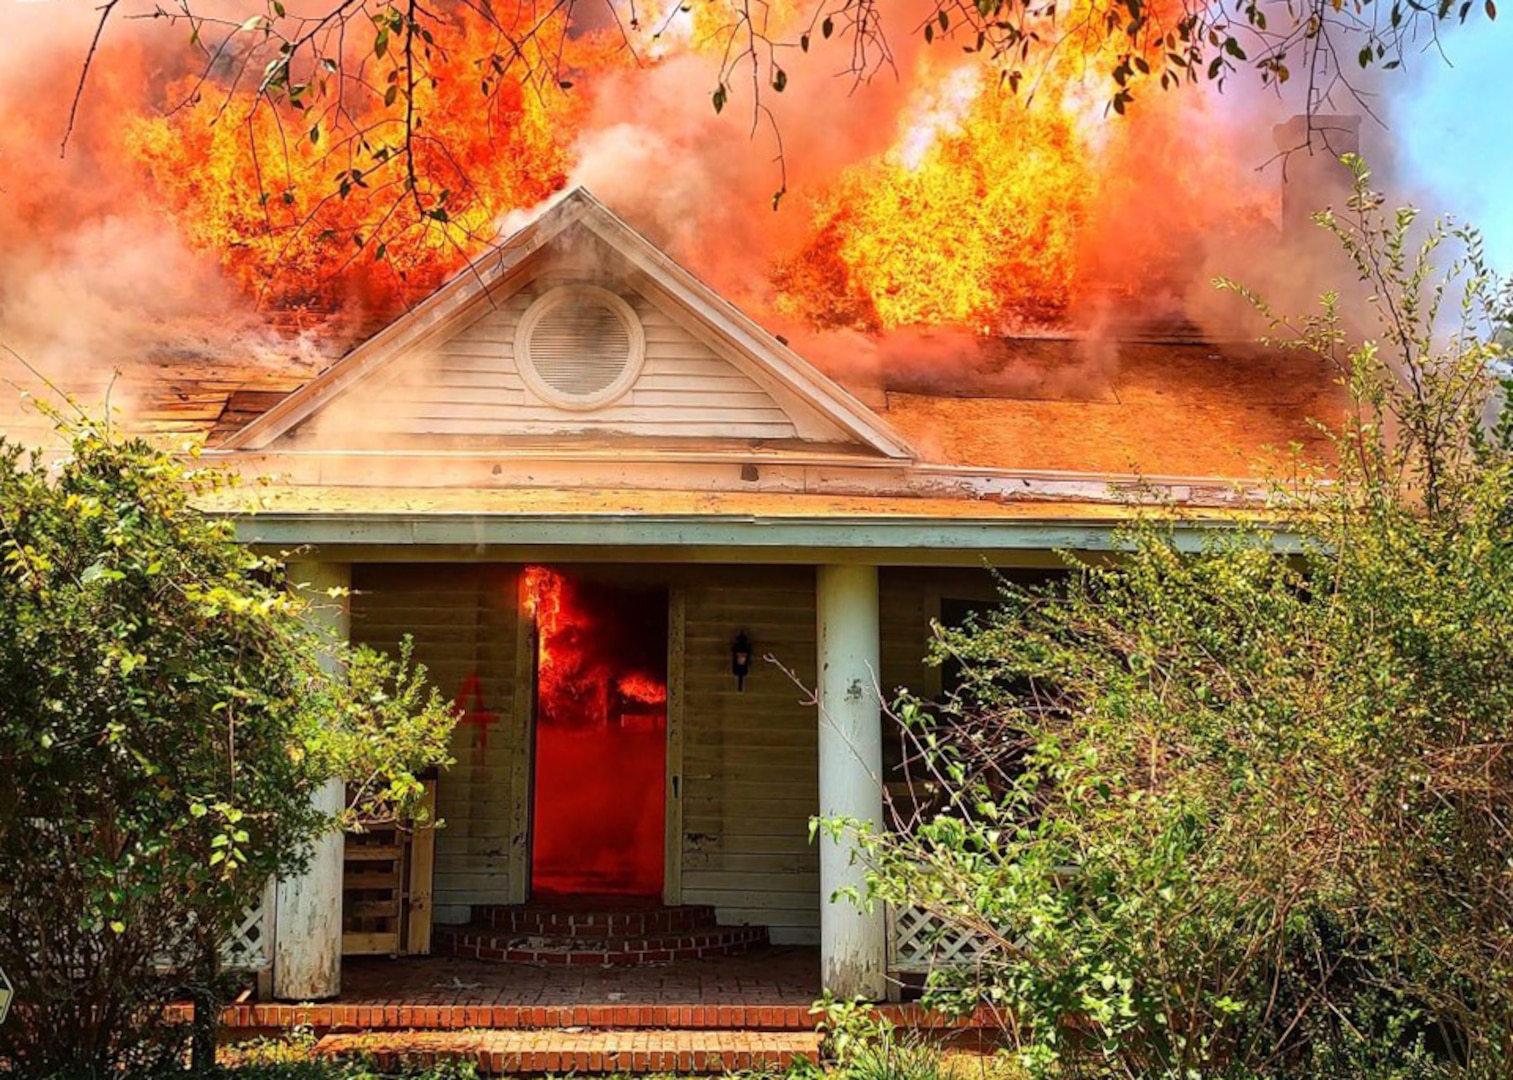 View of the front door of a house and porch. visible through the front door and through the house's roof is orange flame. The fire has completed engulfed the house except the doorway and porch.